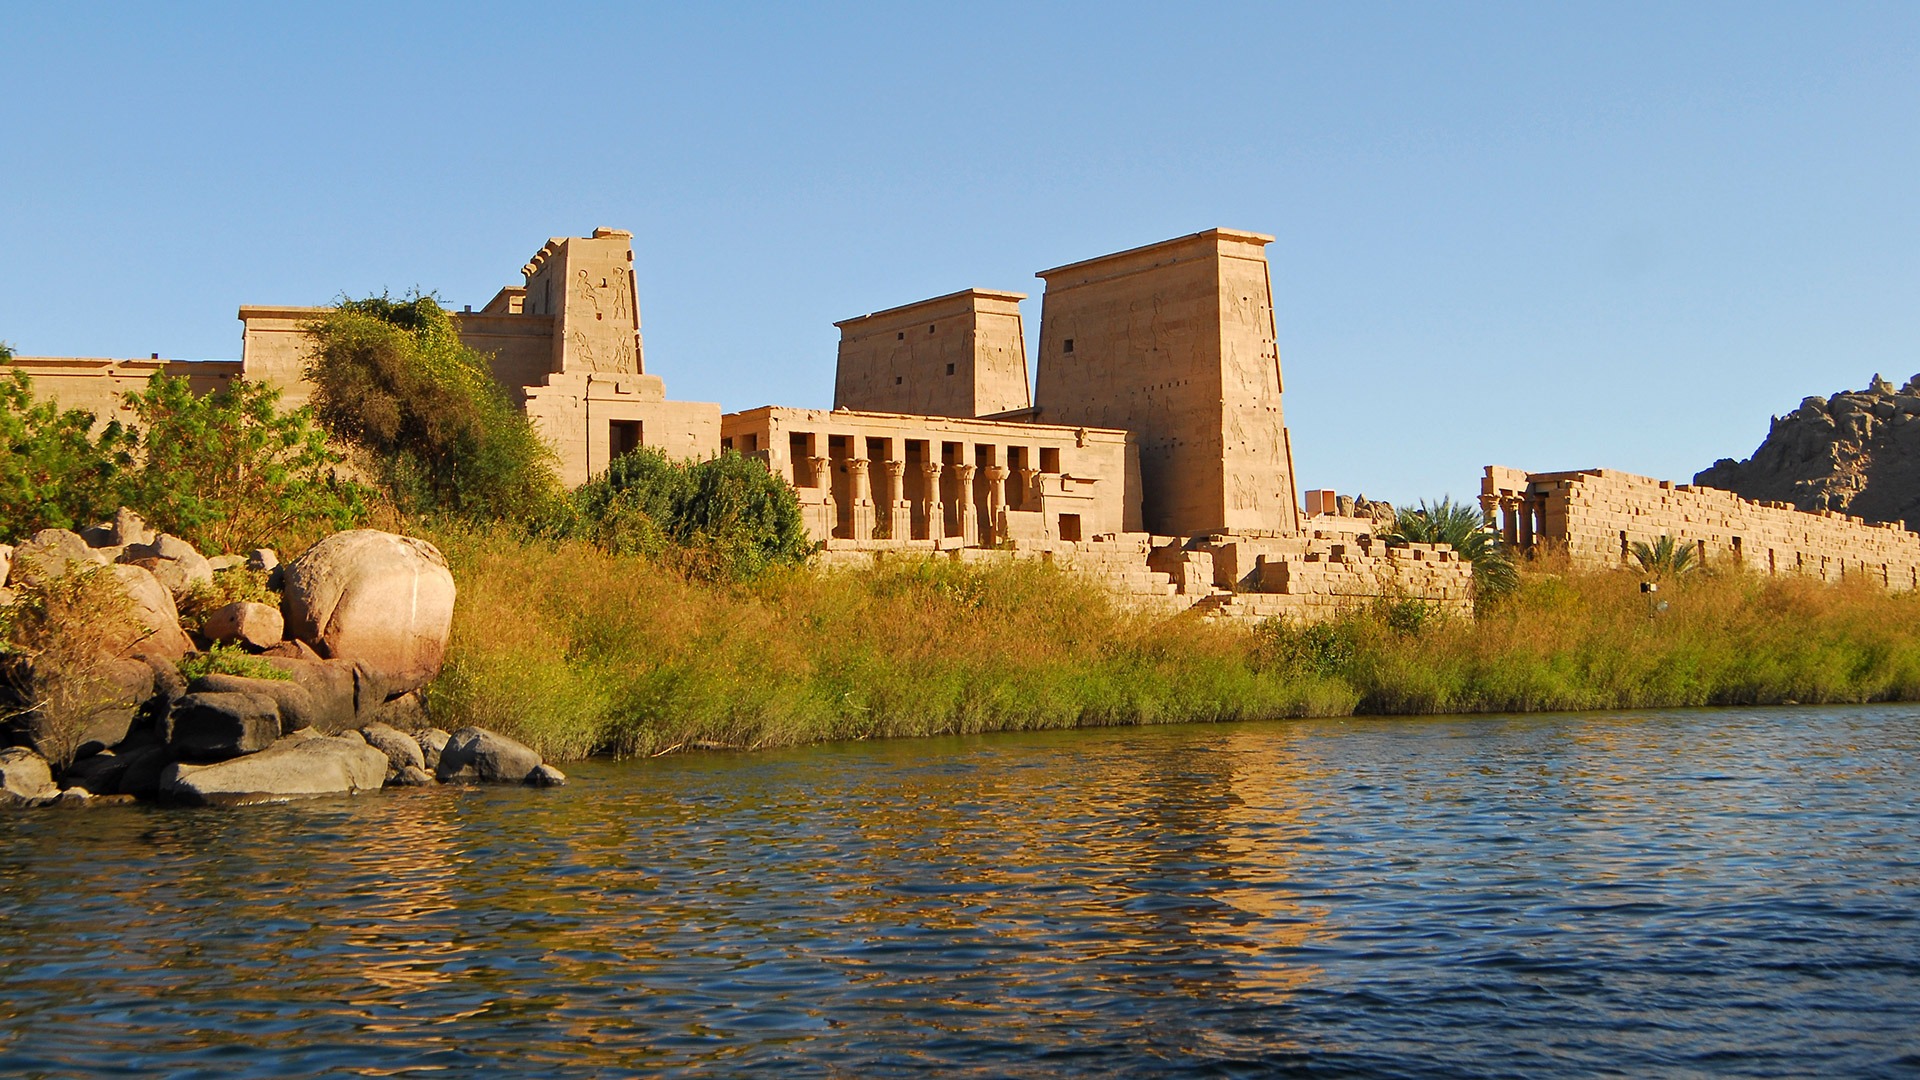 Temple of Isis at Philae on the shores of Lake Nasser, Egypt